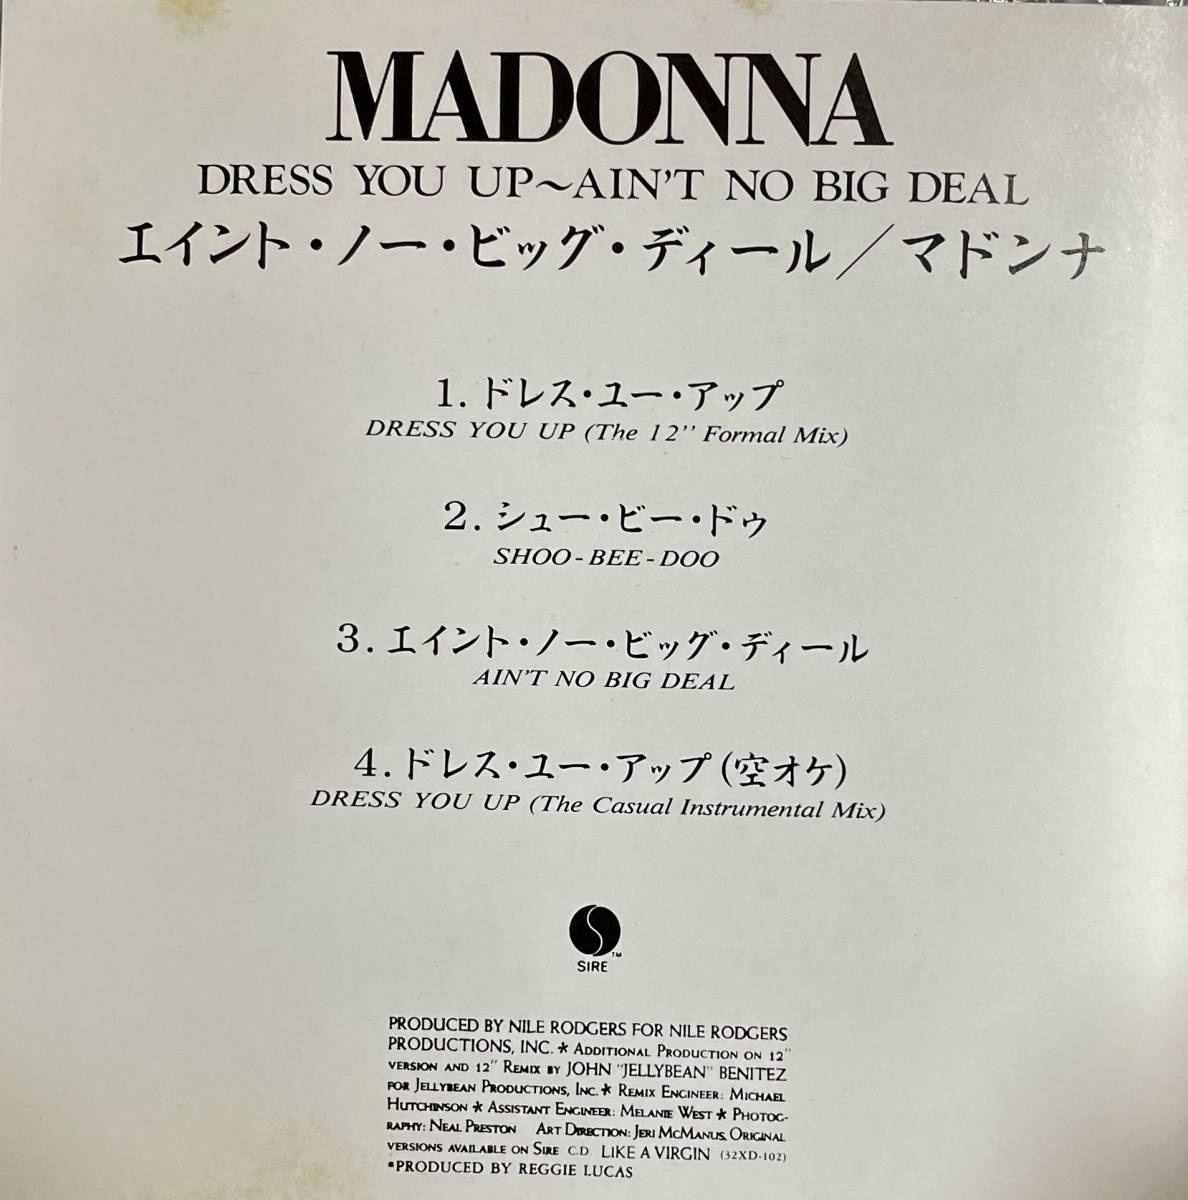 w13 Madonna Dress You Up ~ Ain't No Big Deal 国内盤オンリー Special Edition Japan Only CD Pop Rock Disco Dance 80s 中美品 _画像5